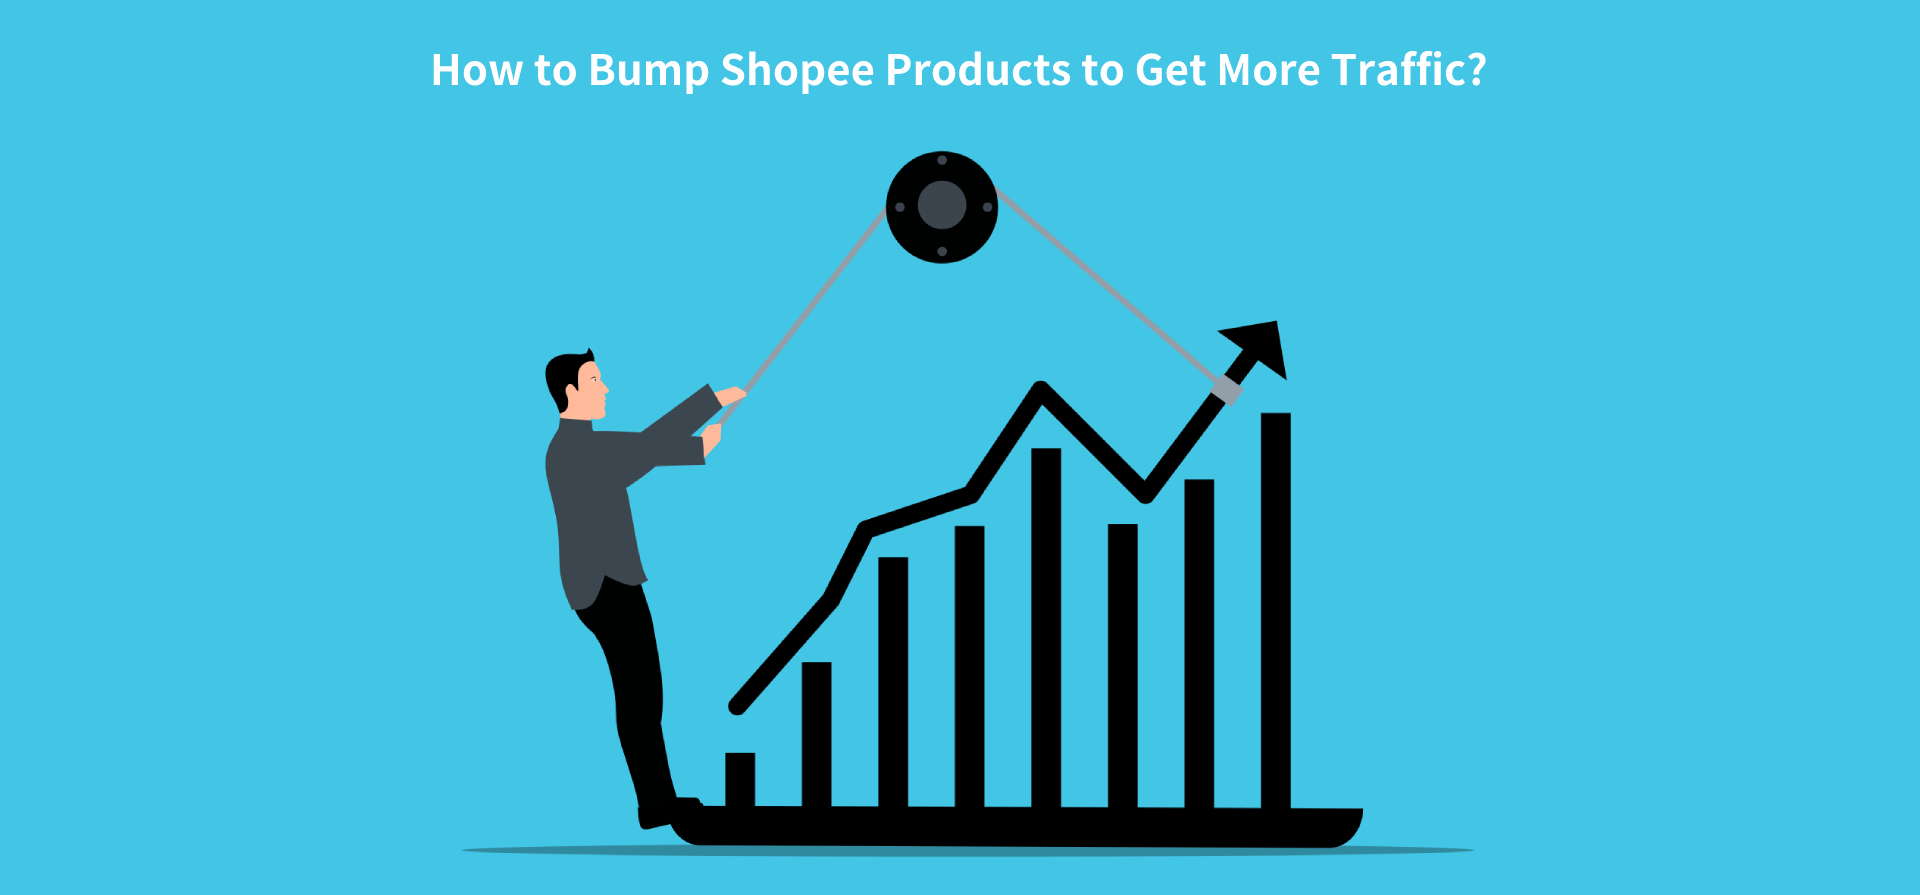 How to Bump Shopee Products to Get More Traffic?